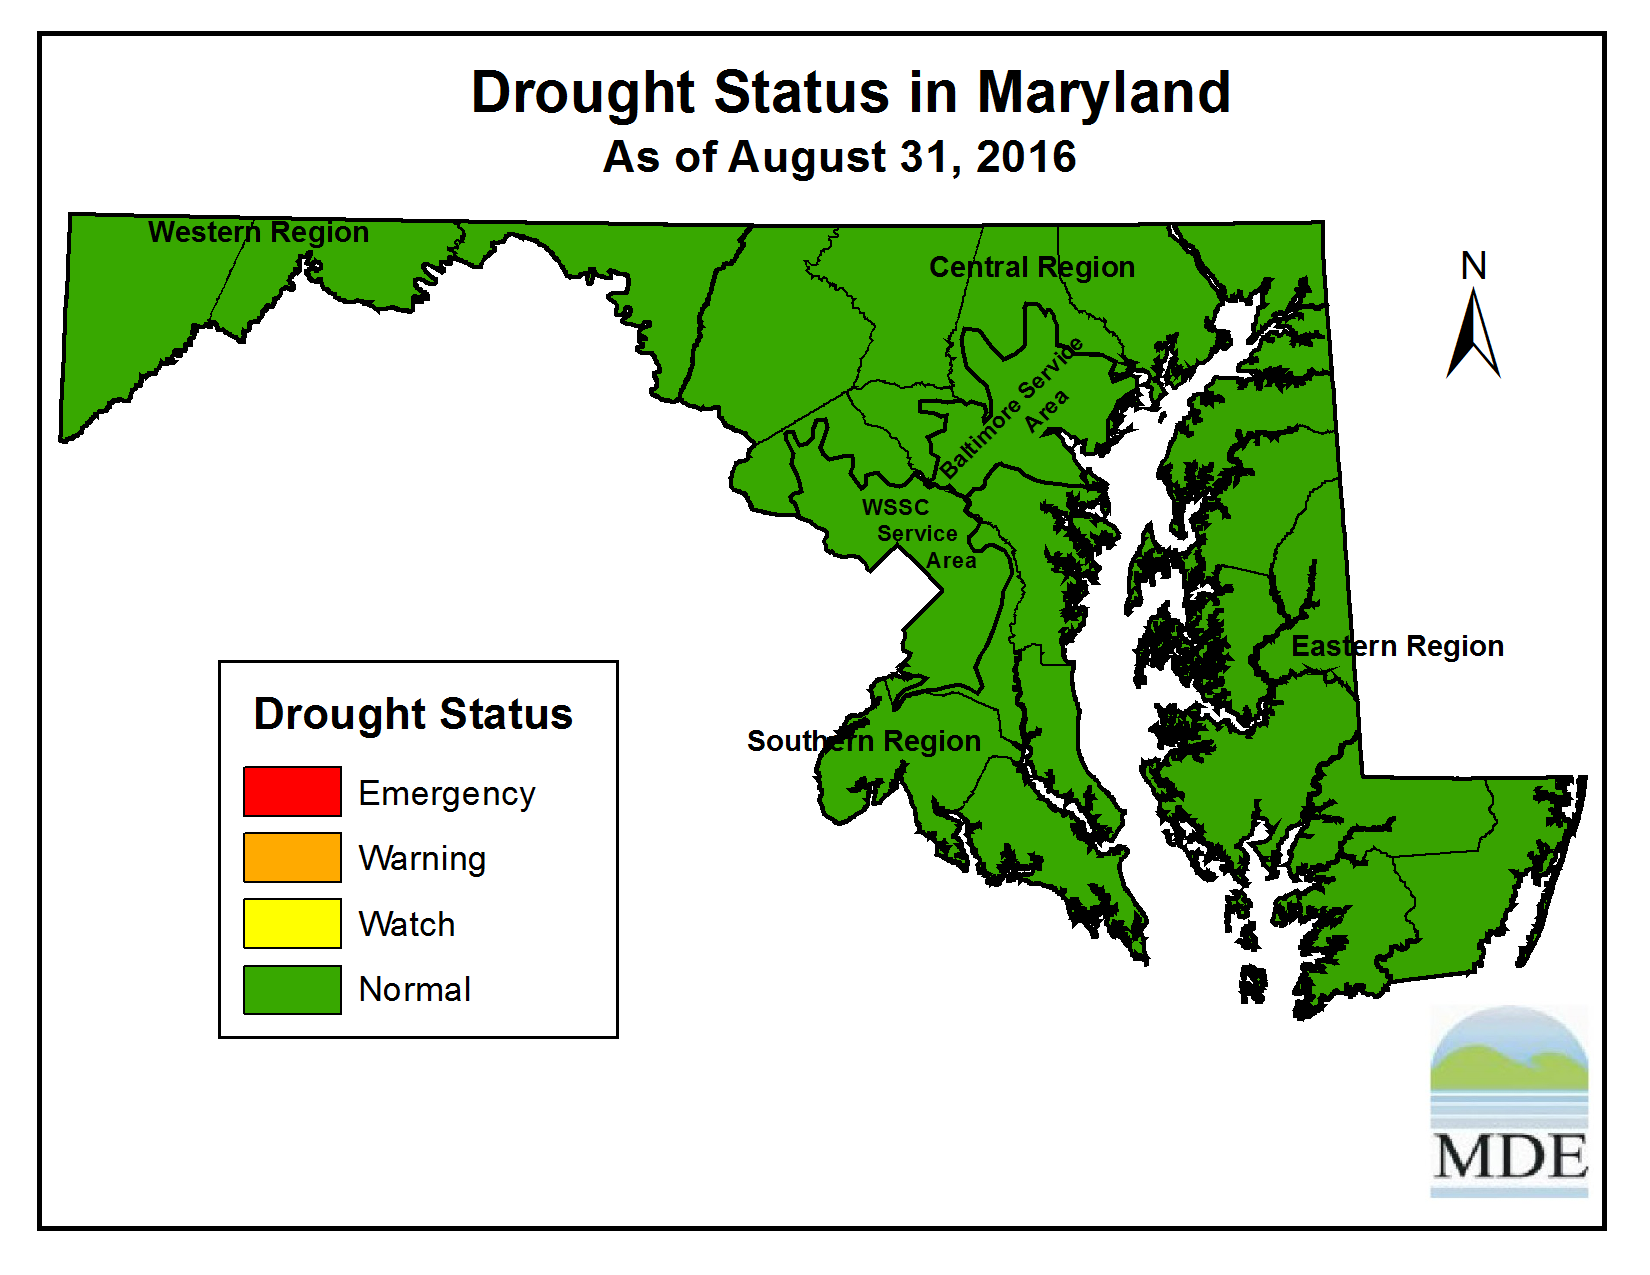 Drought Status as of August 31, 2016